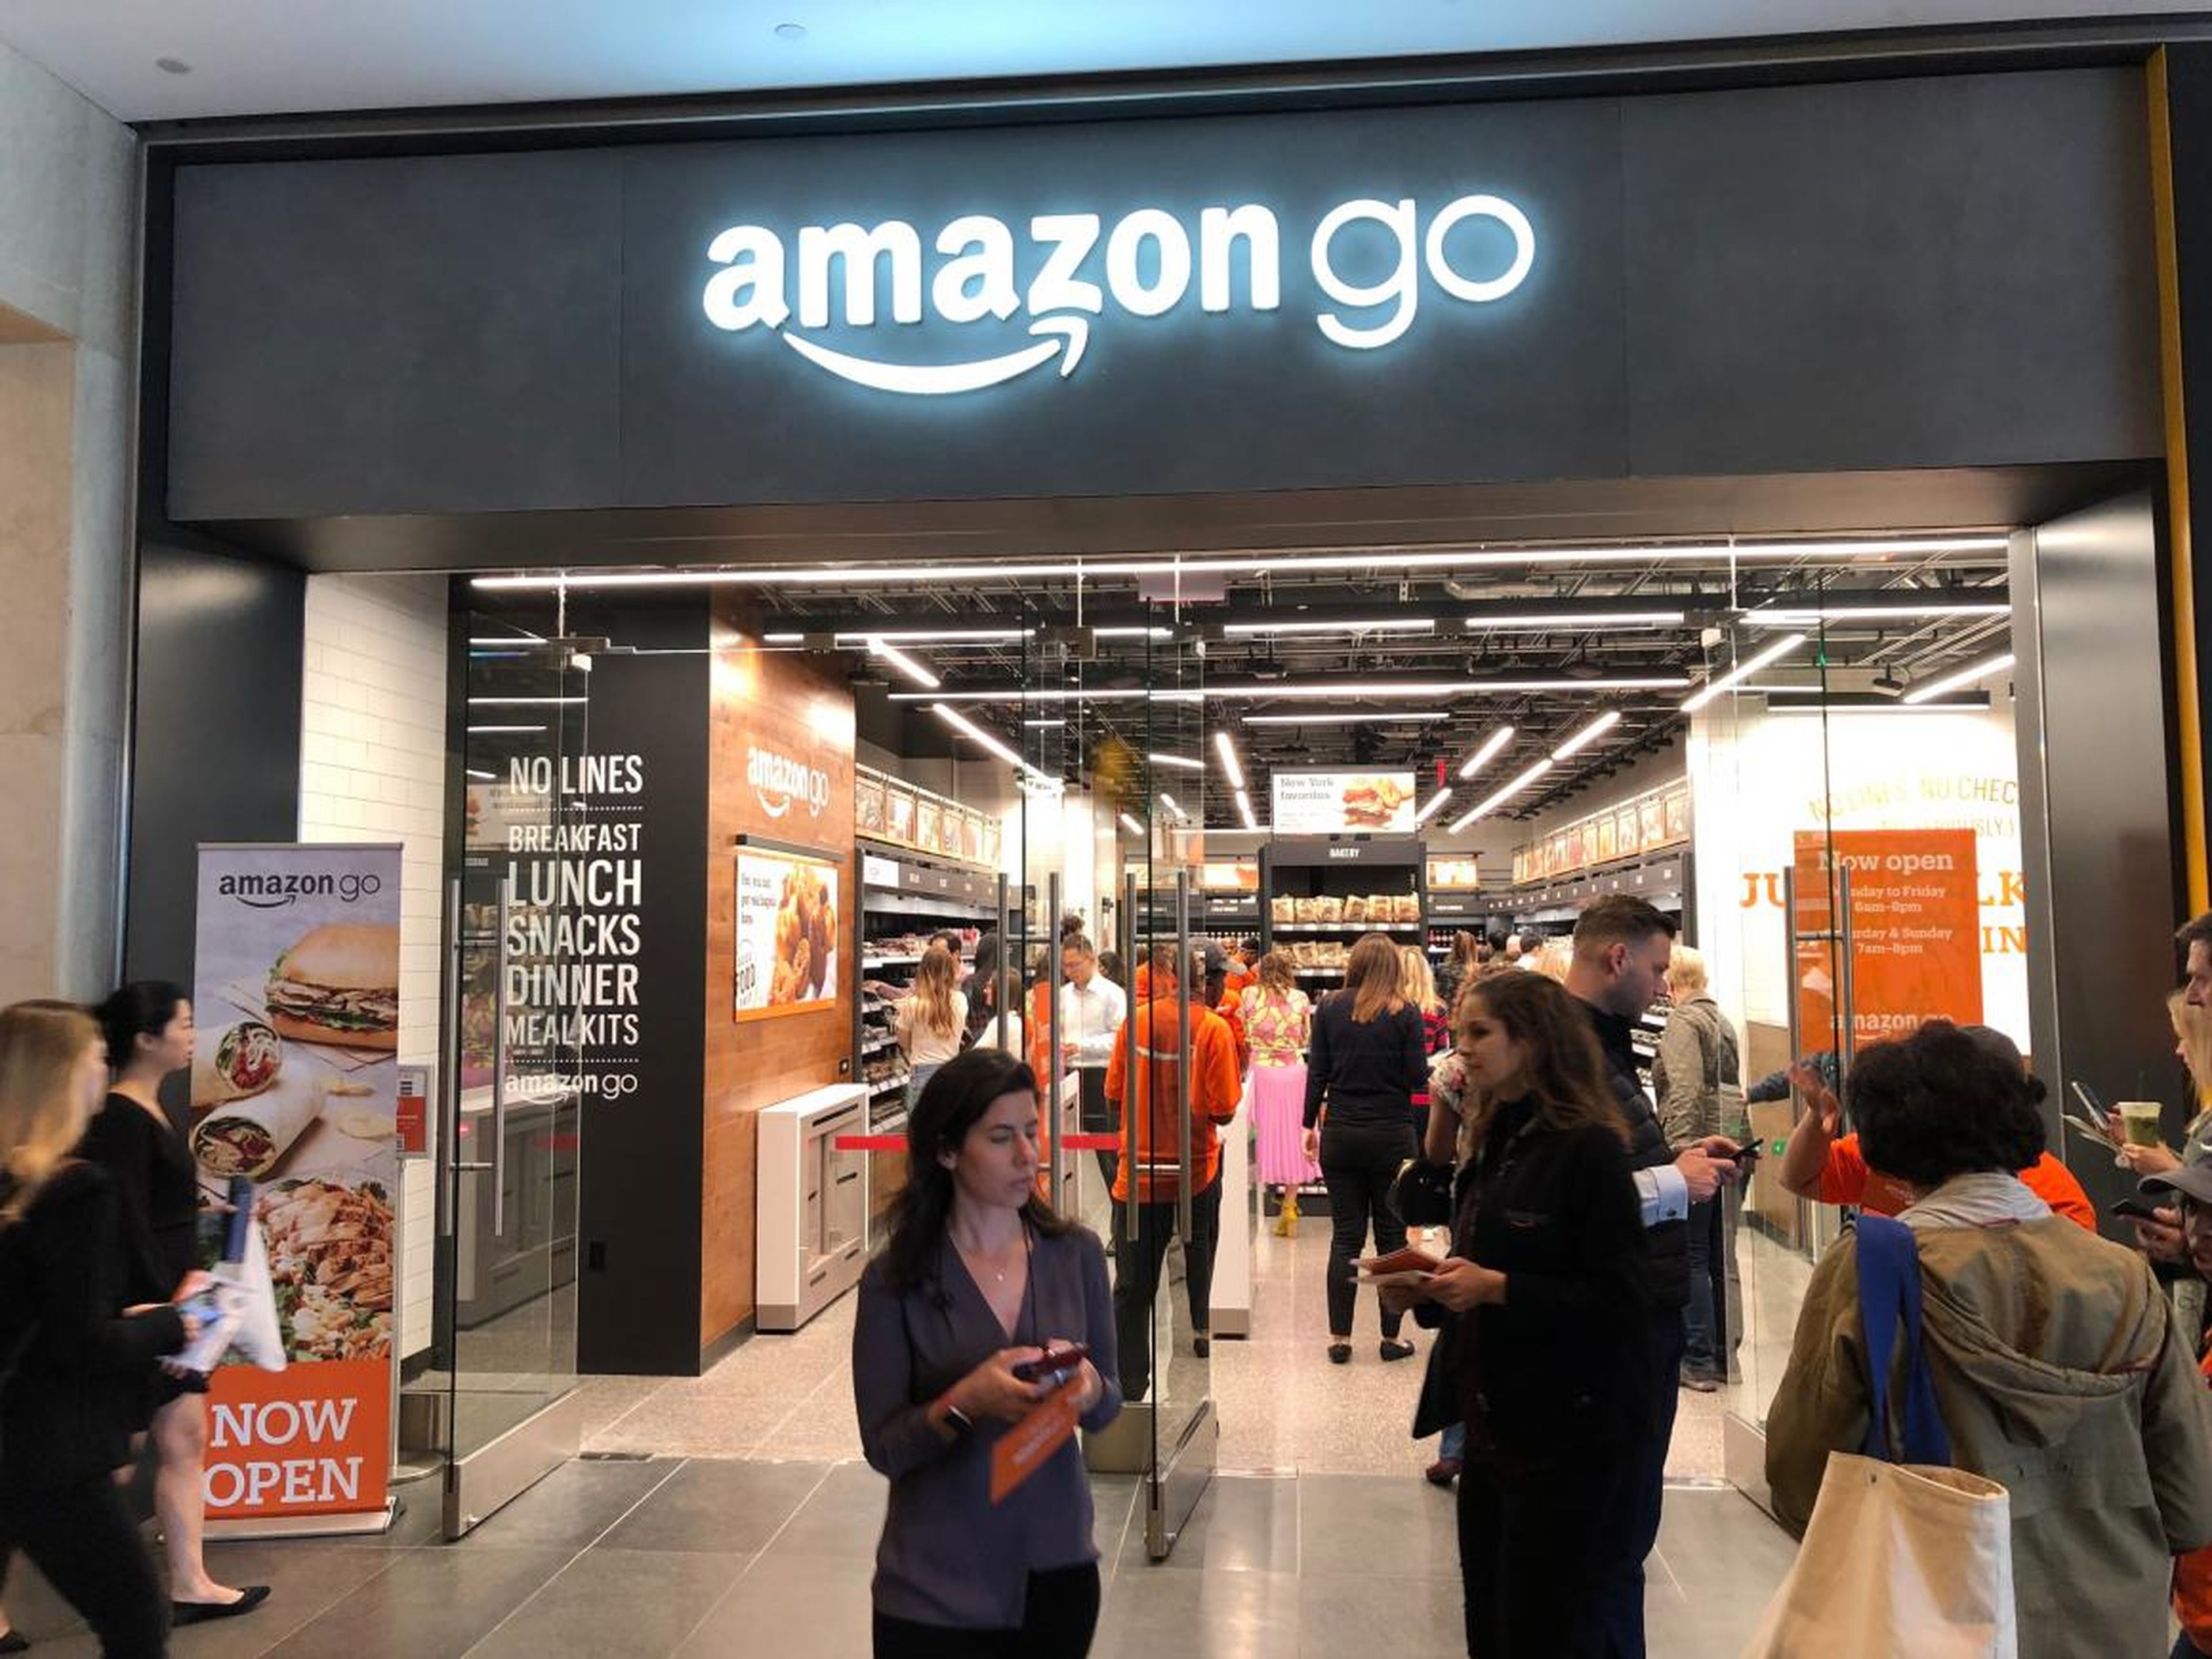 Amazon opened its first New York-based Go store earlier this month.